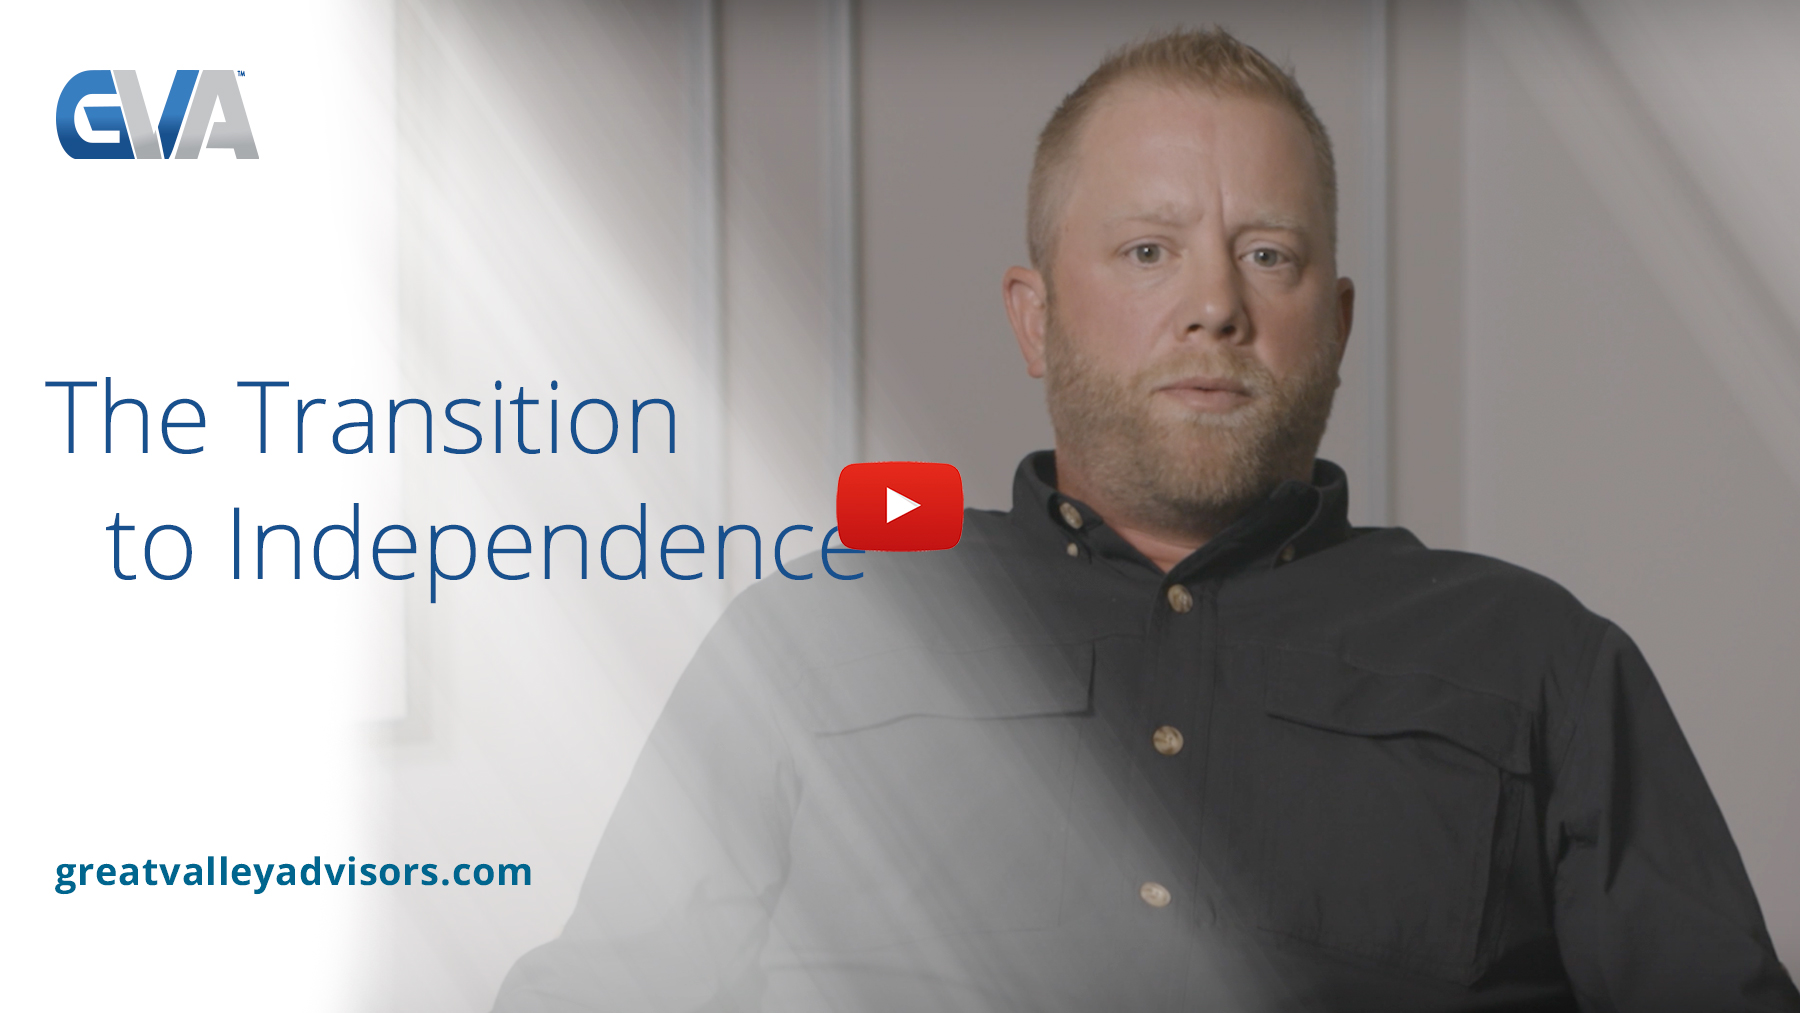 Case Study: GVA Advisors on Their Transition to Independence